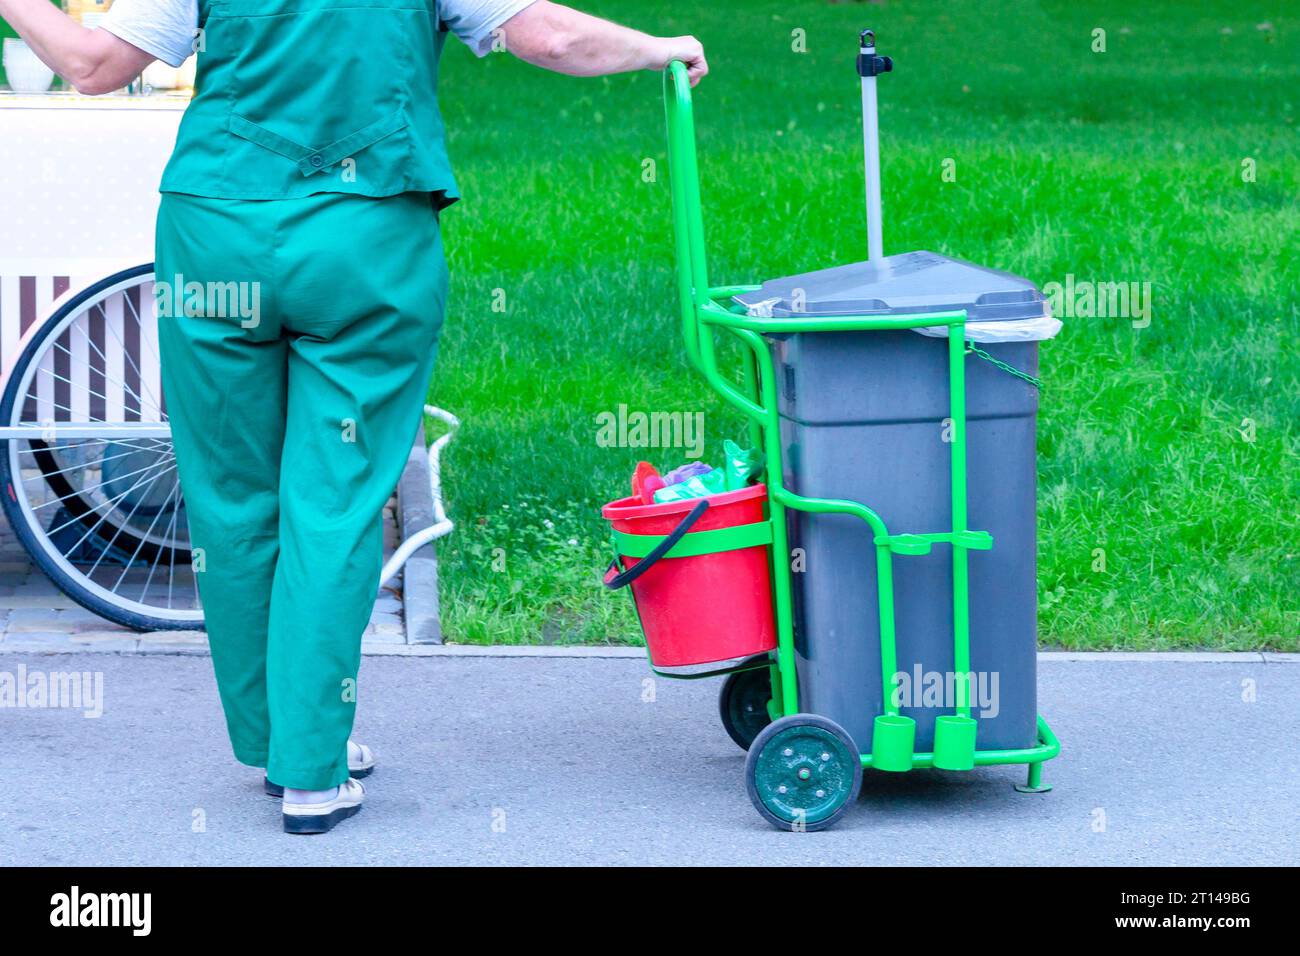 The janitor is working. The janitor with cleaning items. sanitation worker sweep street Stock Photo